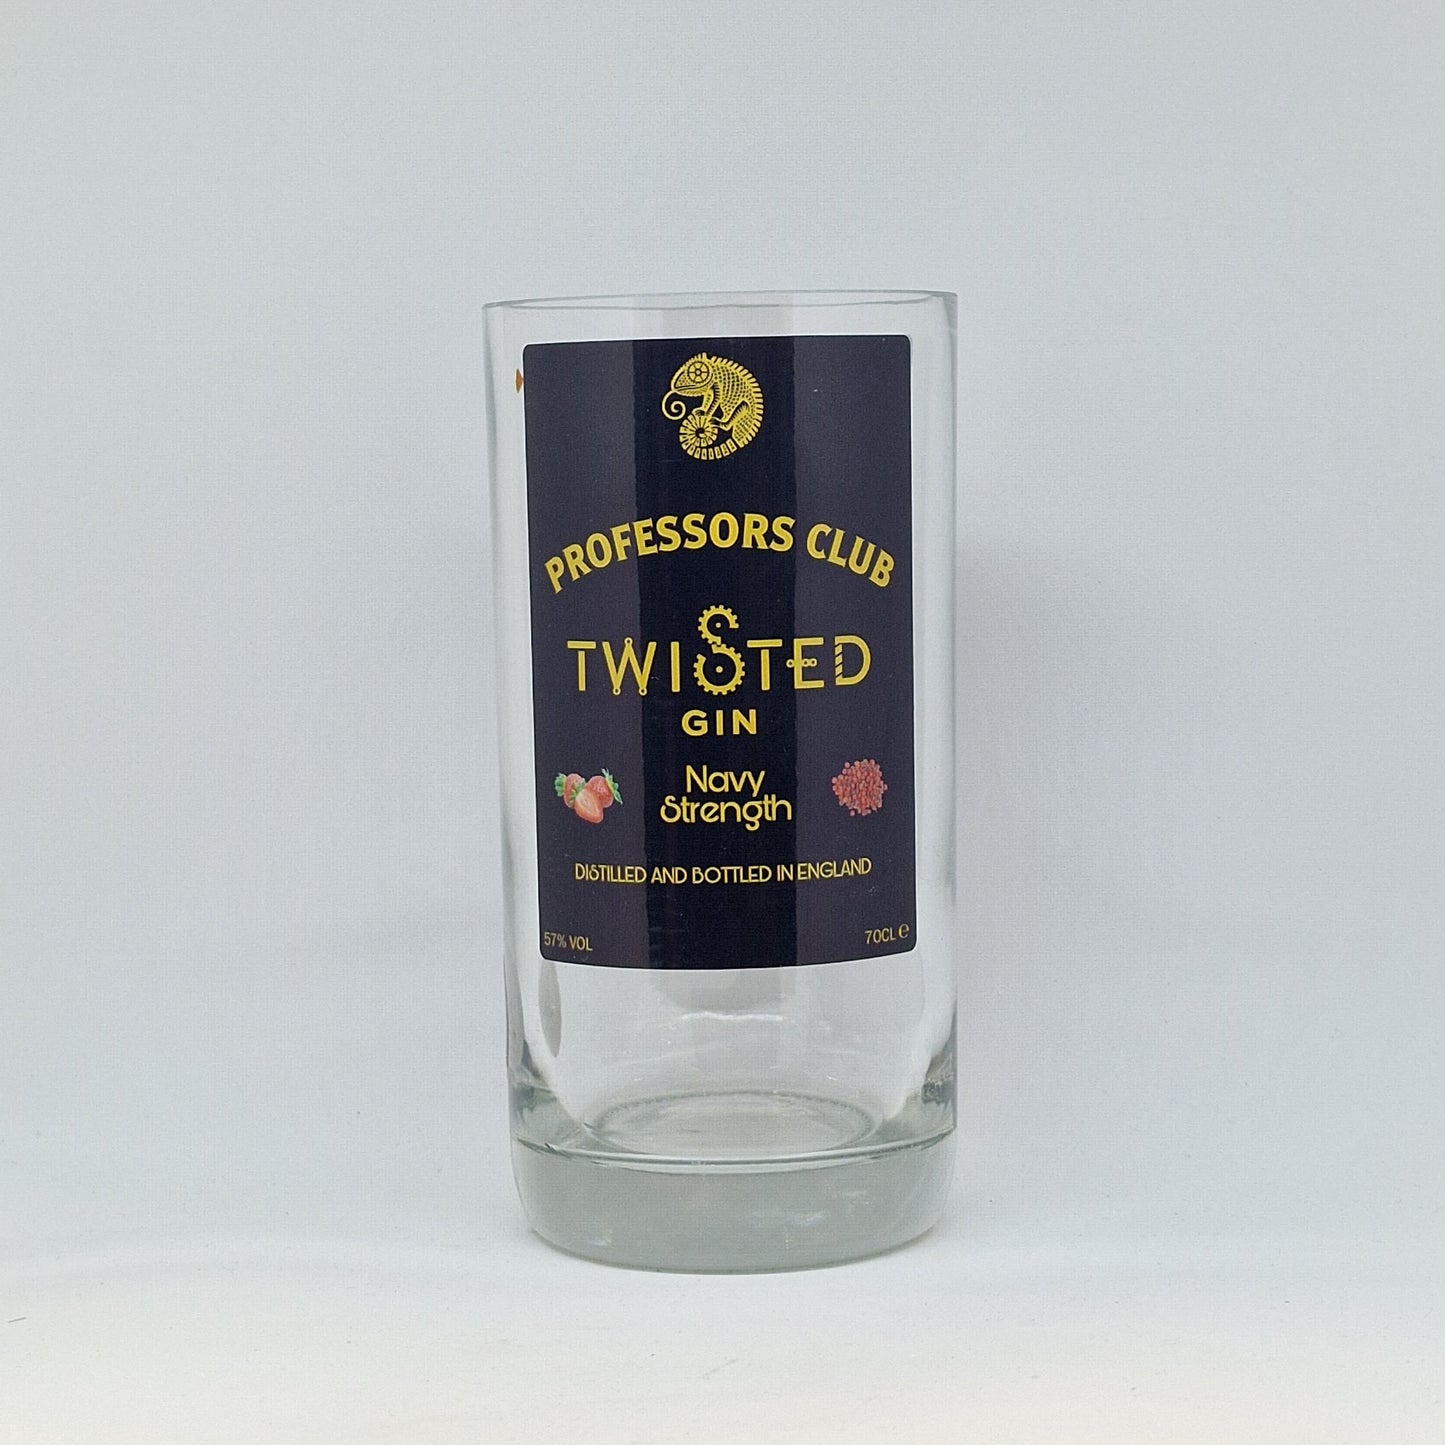 Professors Club Twisted Gin Tall Bottle Candle